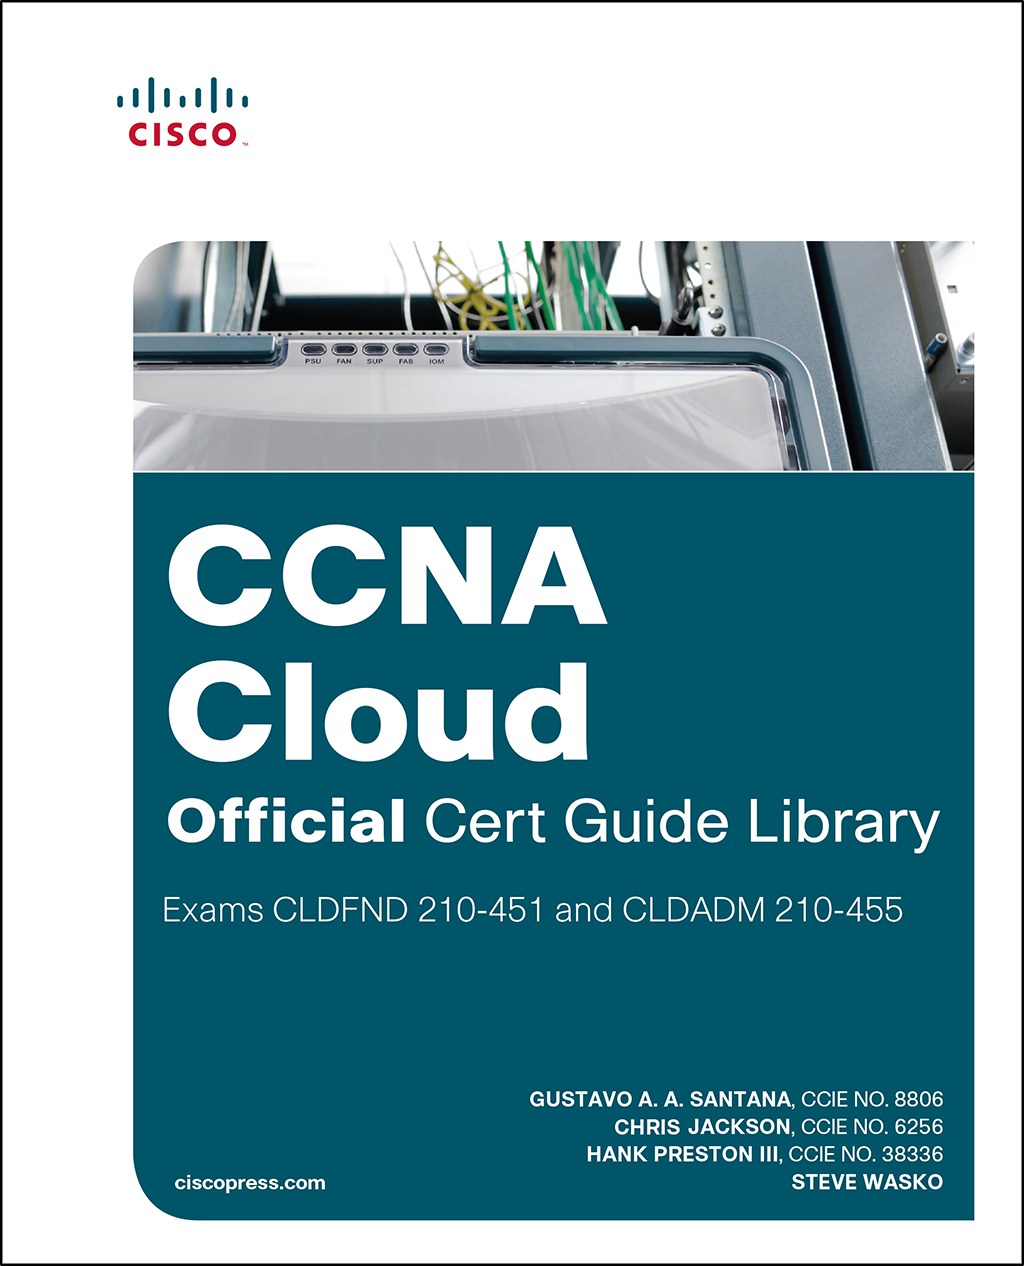 CCNA Cloud Official Cert Guide Library (Exams CLDFND 210-451 and CLDADM 210-455)